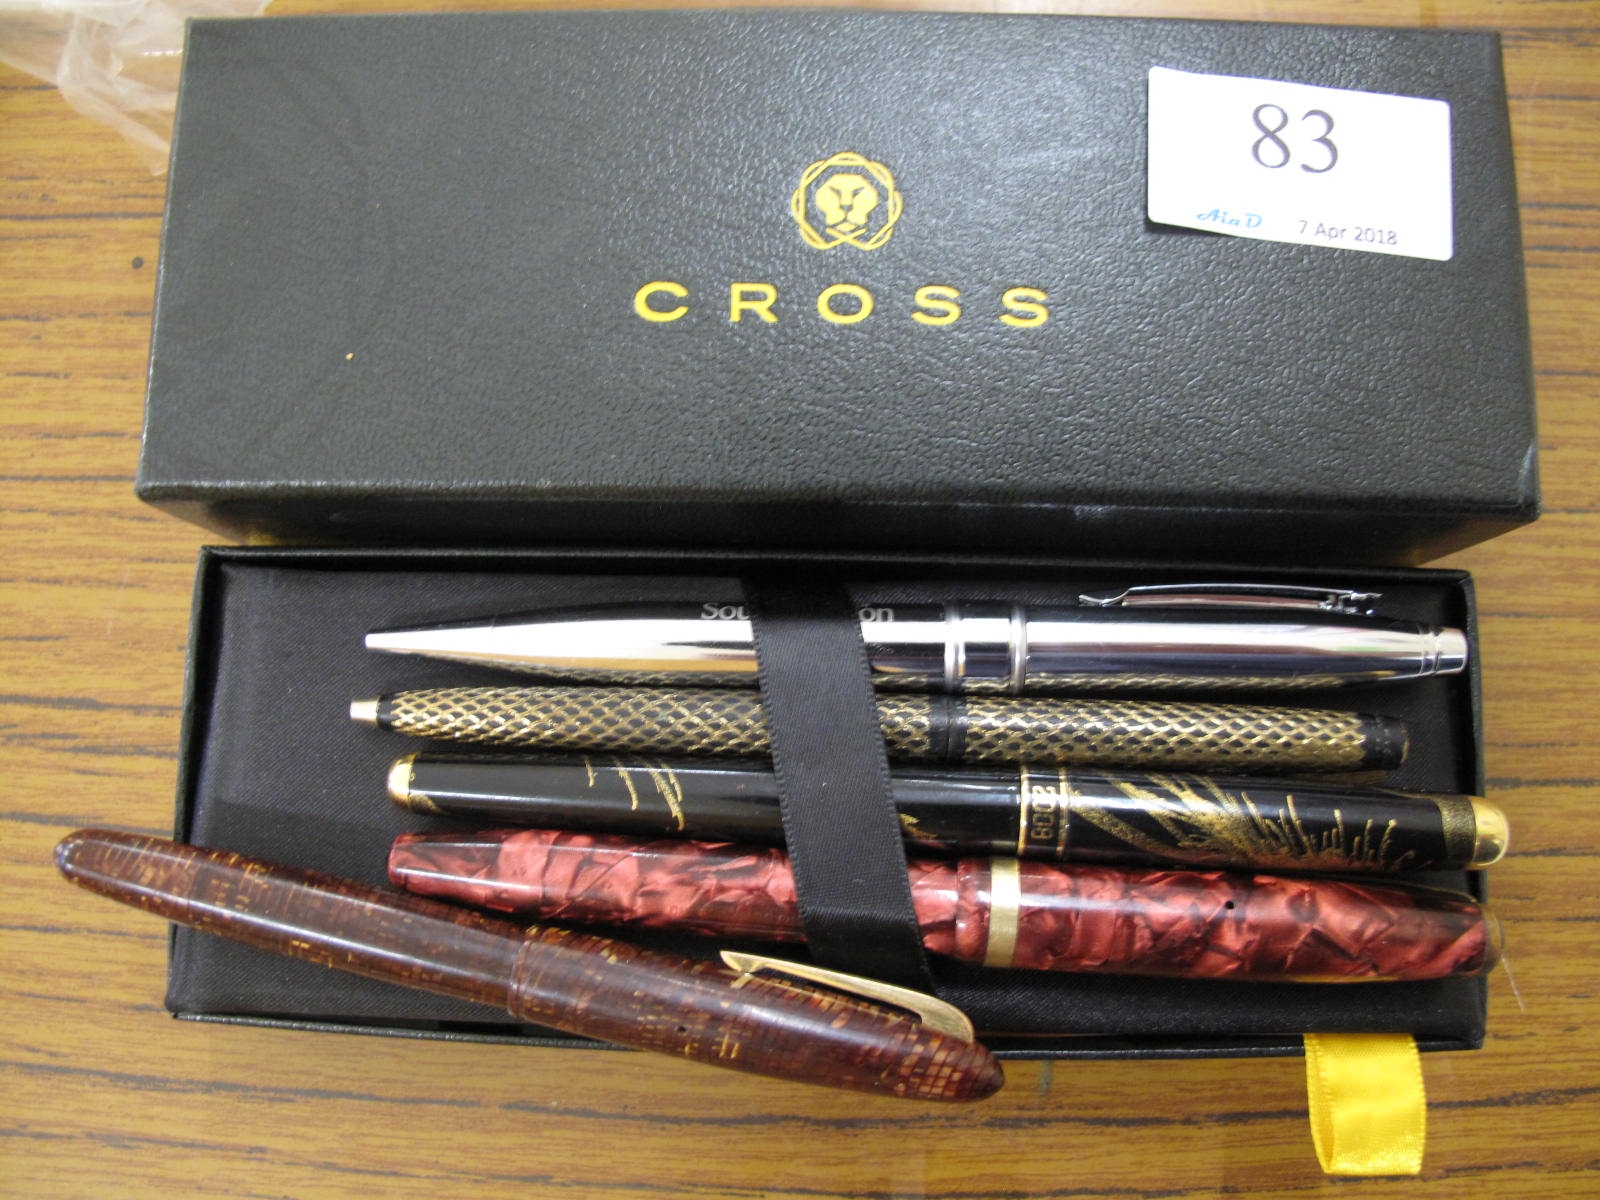 Lot 83 - Collection of 5 fountain pens and Cross box - Sold for £55